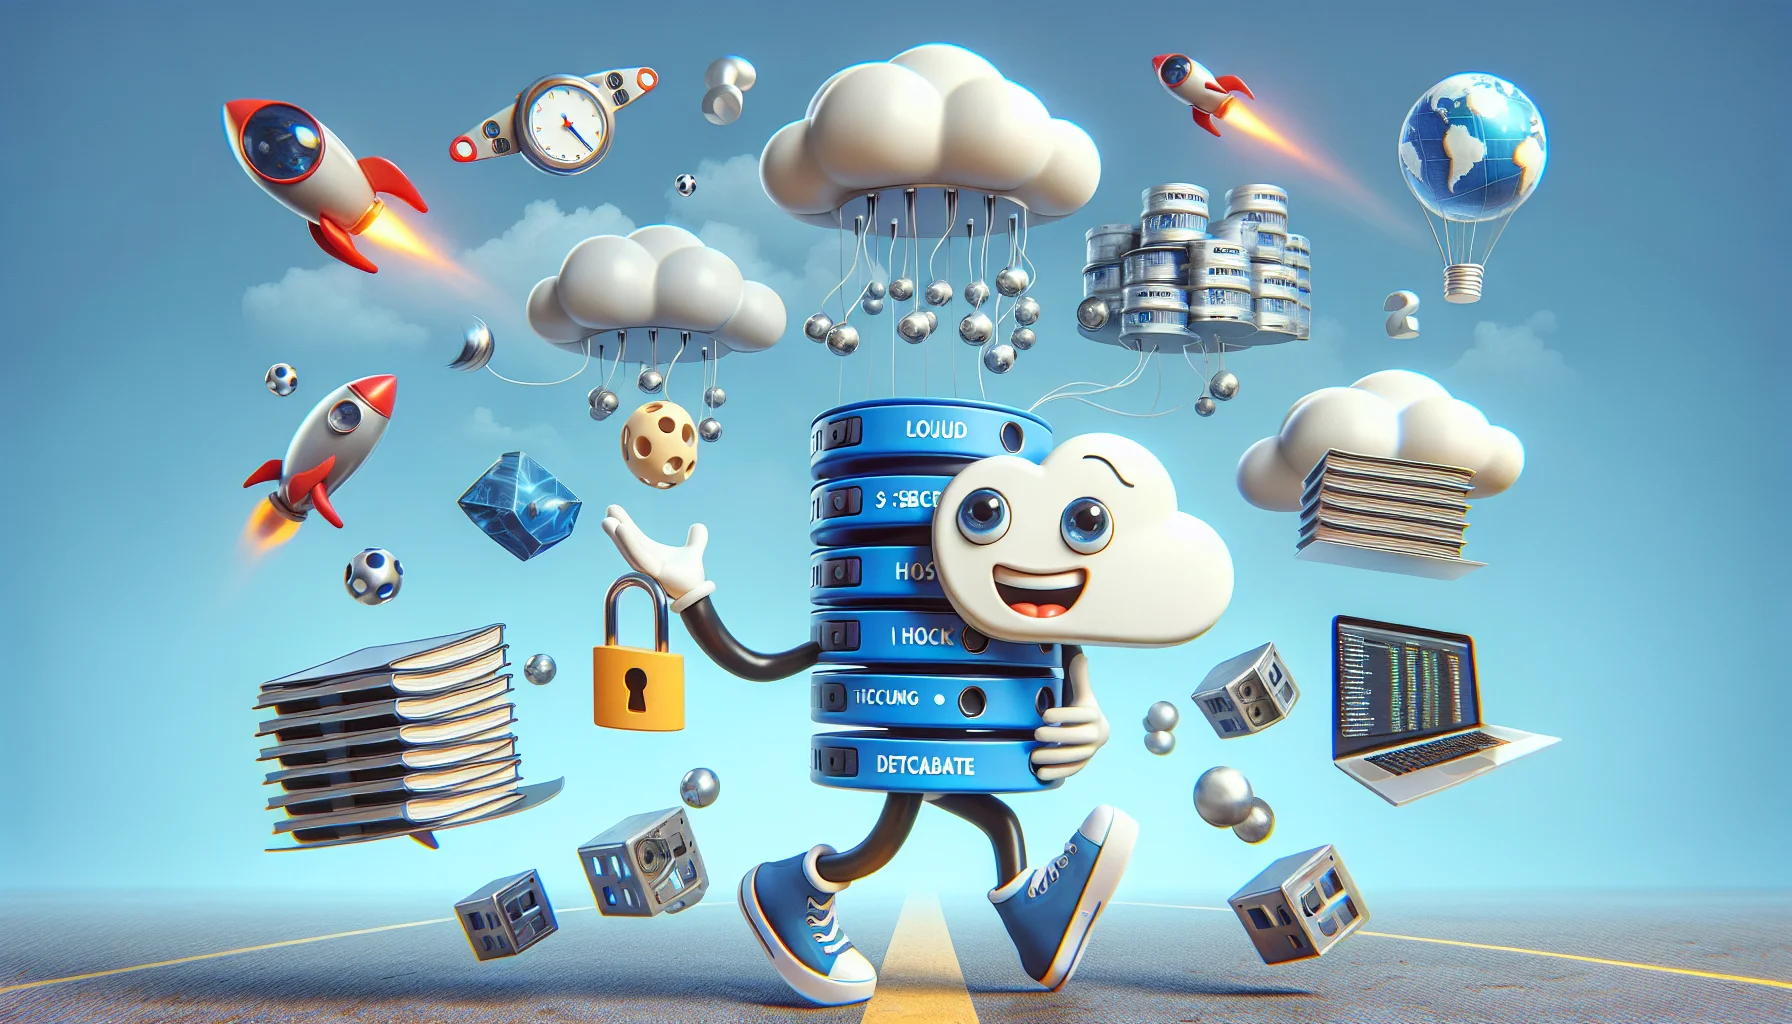 Create a humorous scene depicting a generic brand of web hosting services, in a realistic style. Perhaps the service logo, portrayed as a living character, is busy juggling numerous elements symbolic of web hosting features, like a floating cloud, a secure lock, a lightning-fast spaceship and a heavy database folder. The twist in the scene could be that the character manages to balance them all proficiently while standing on one leg, providing a playful visual metaphor for efficient, multitasking web hosting.